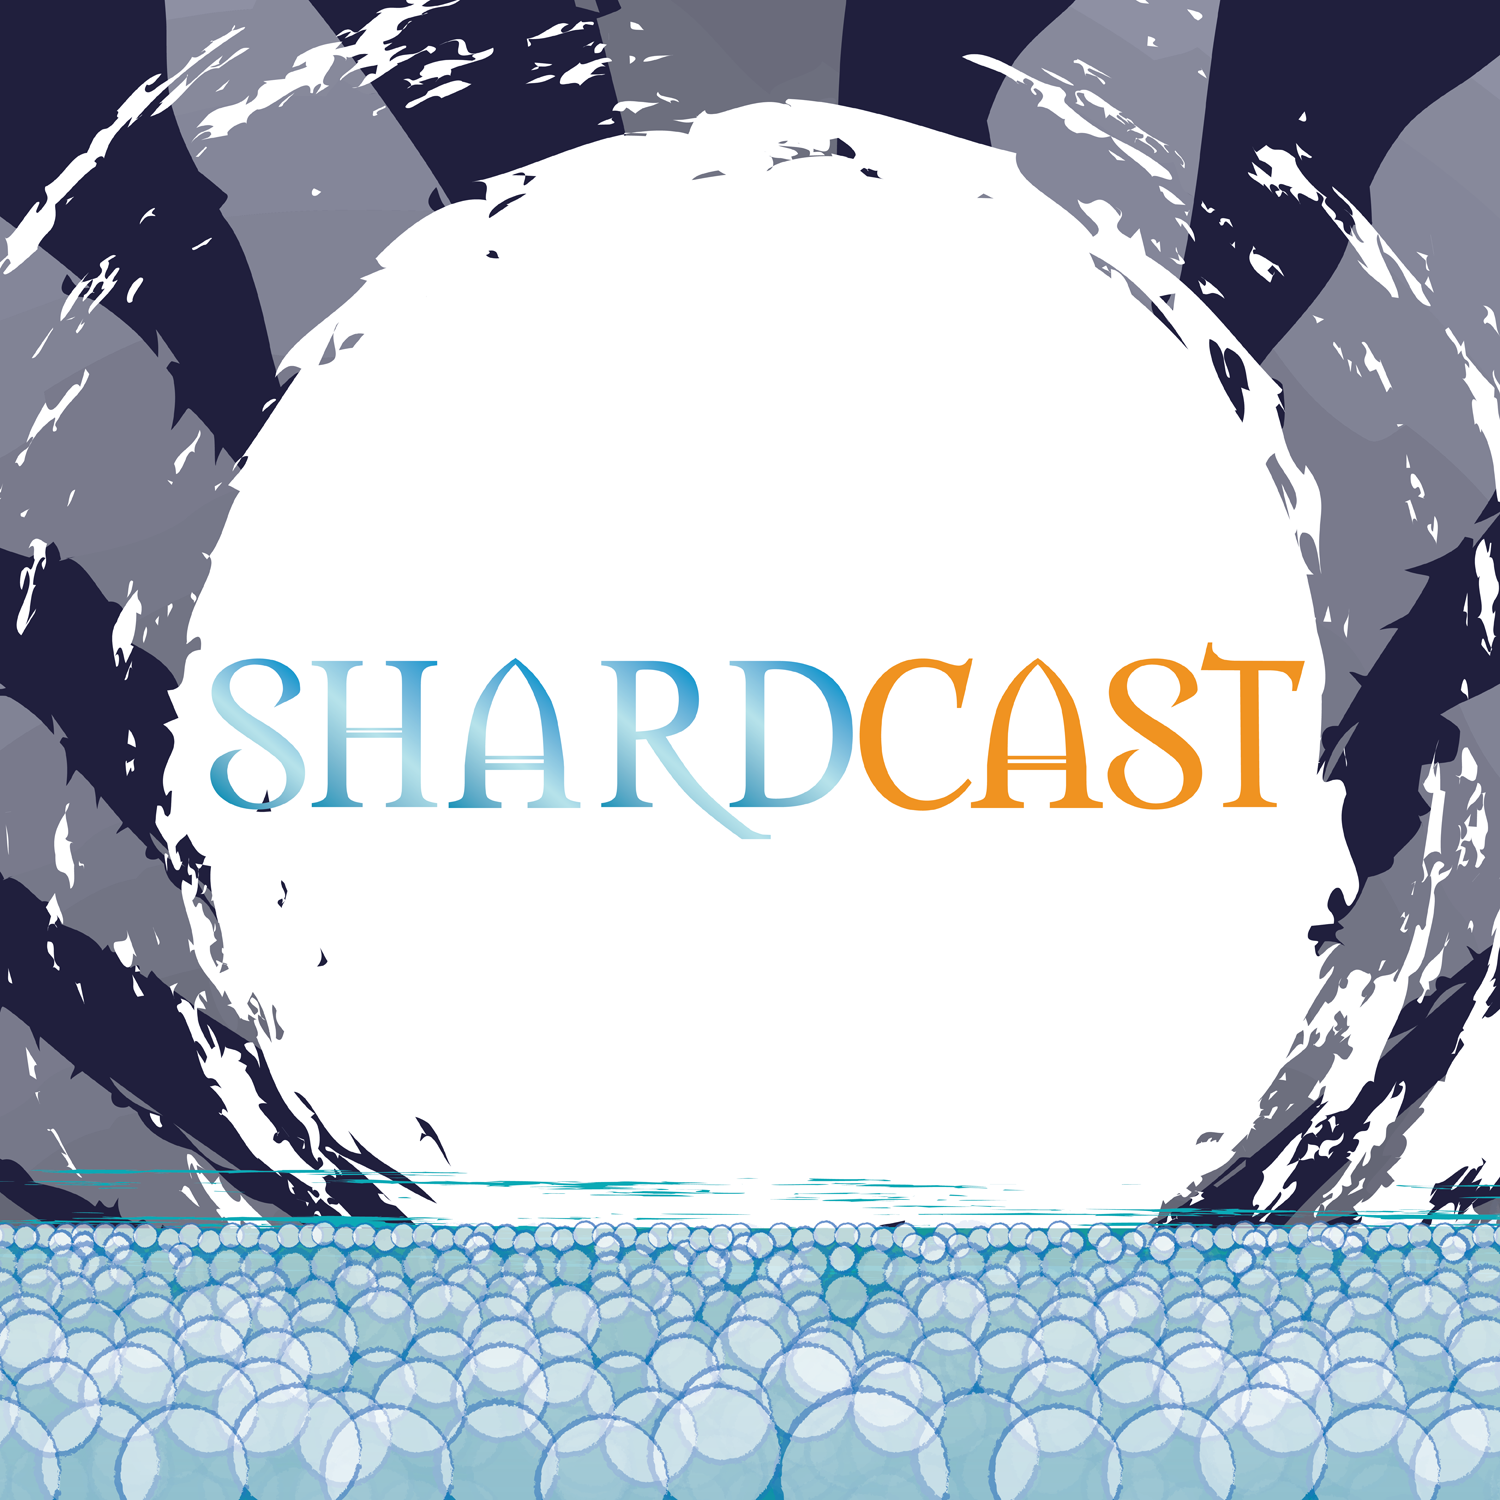 More information about "Shardcast: The Lost Metal Predictions"